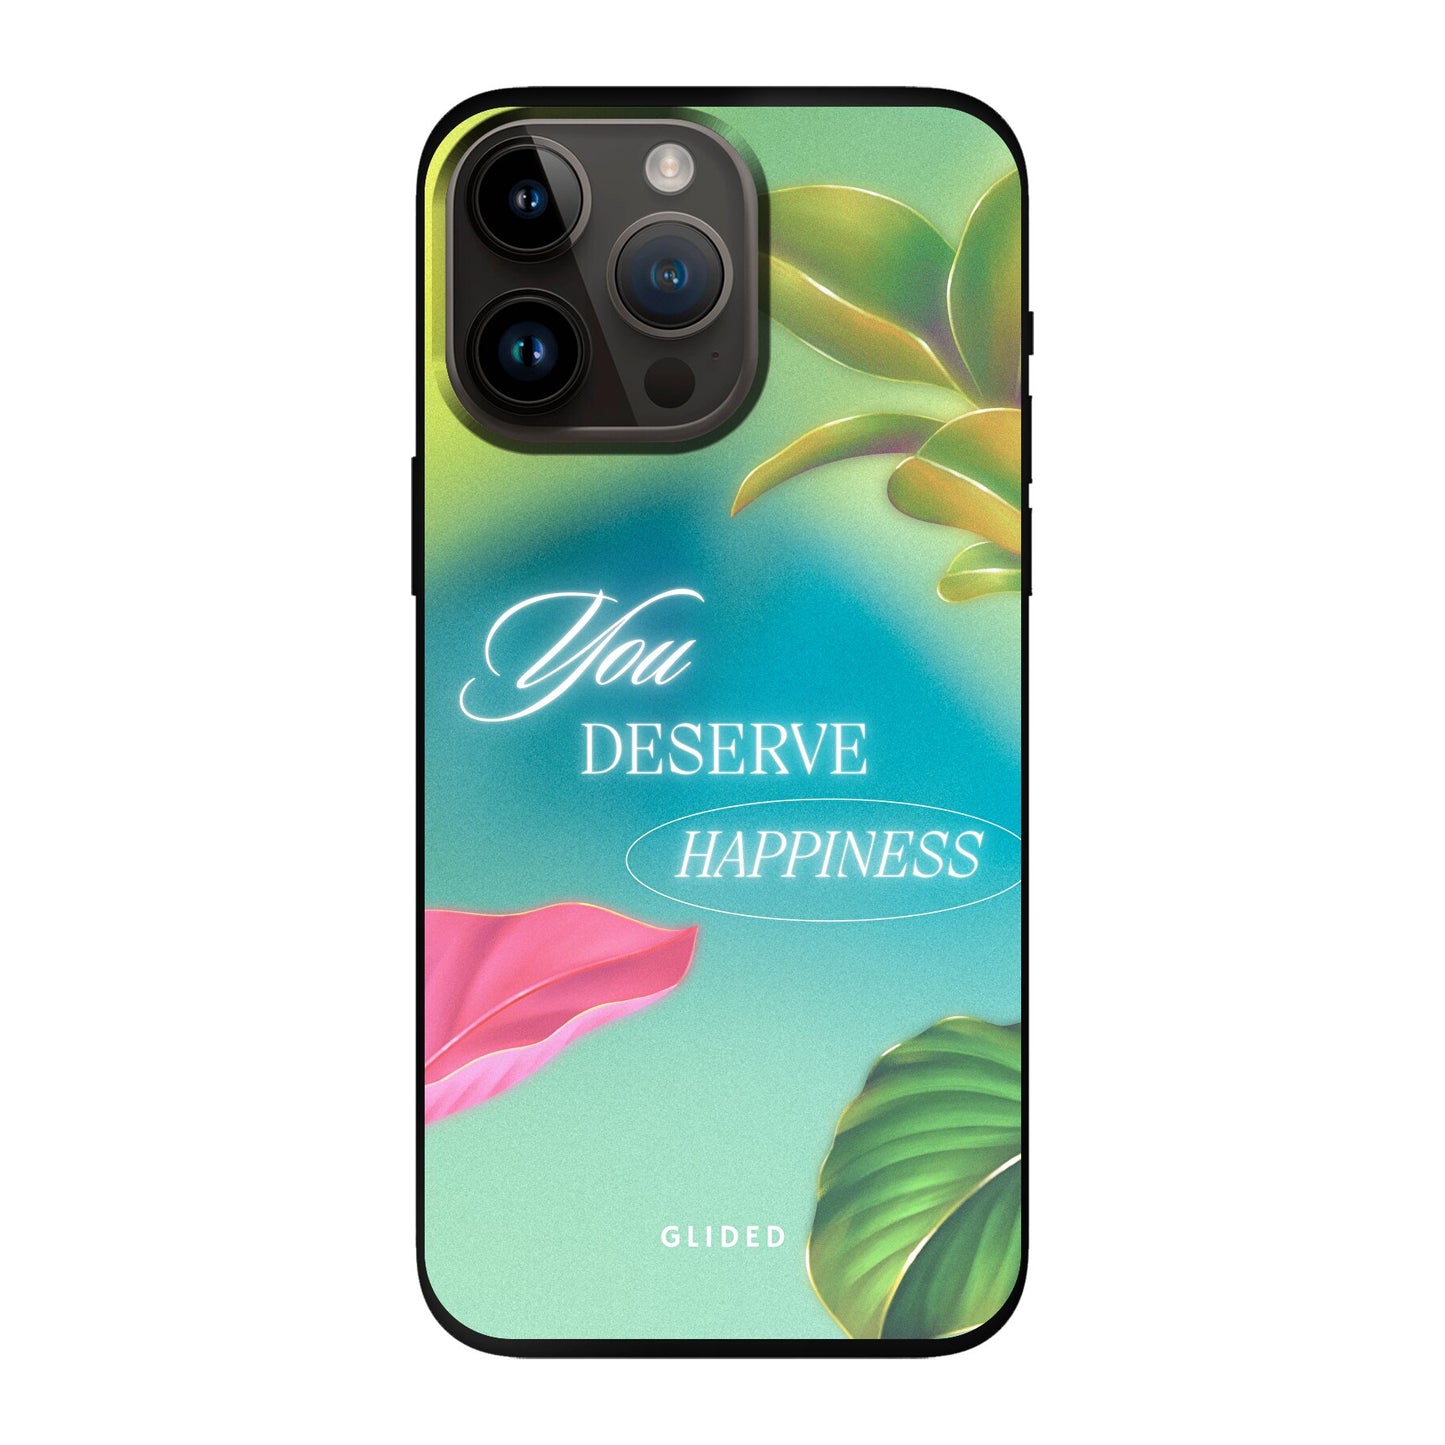 Happiness - iPhone 14 Pro Max - Soft case